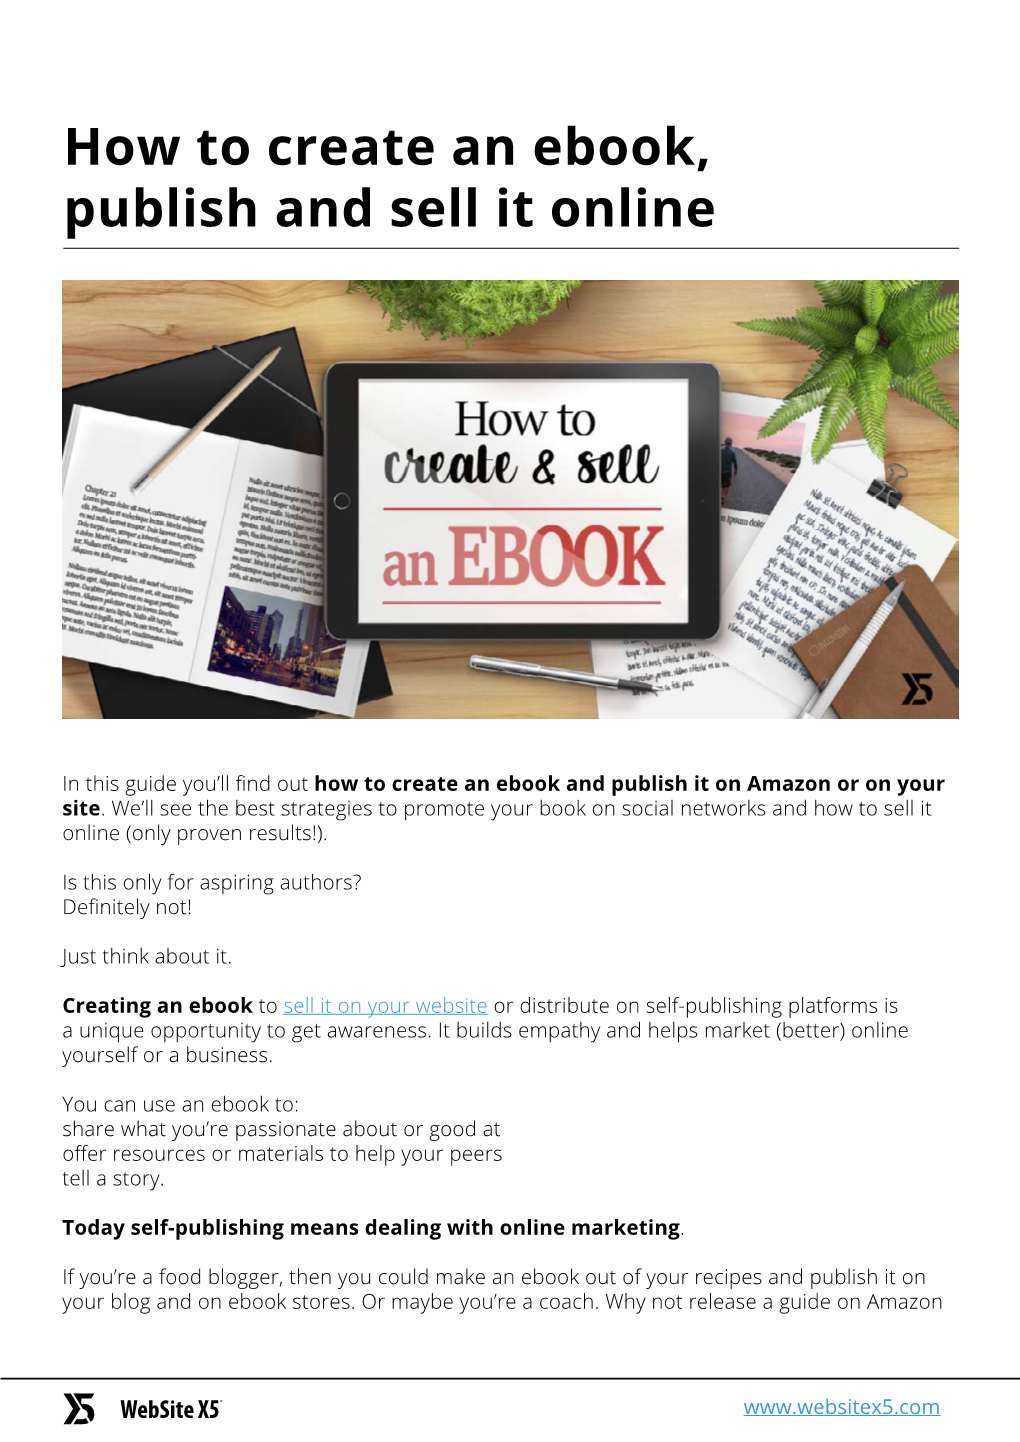 How to Create an Ebook, Publish and Sell It Online